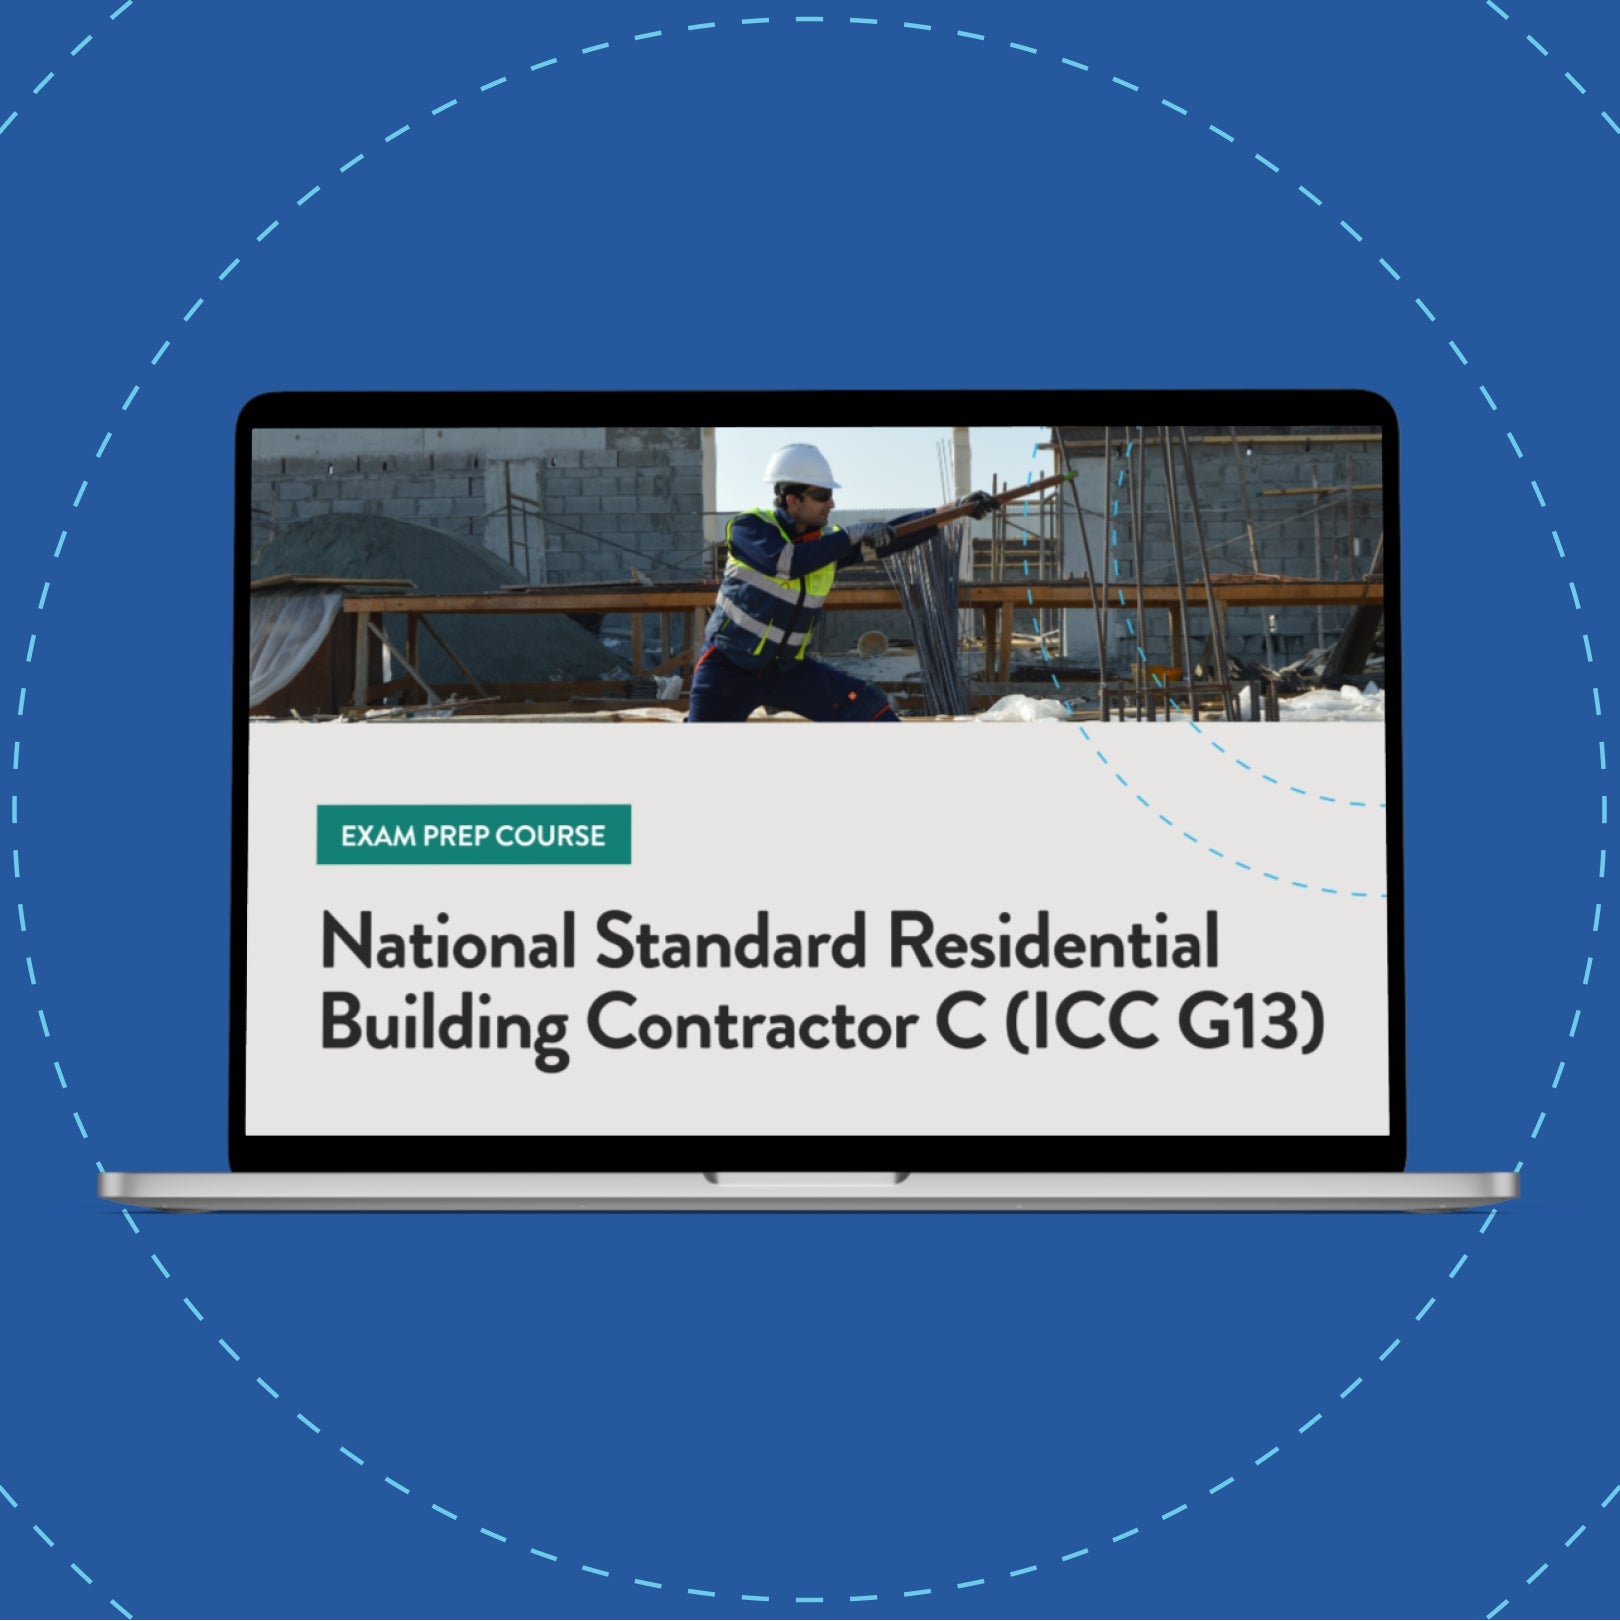 National Standard Residential Building Contractor C (ICC G13) Exam Prep Course